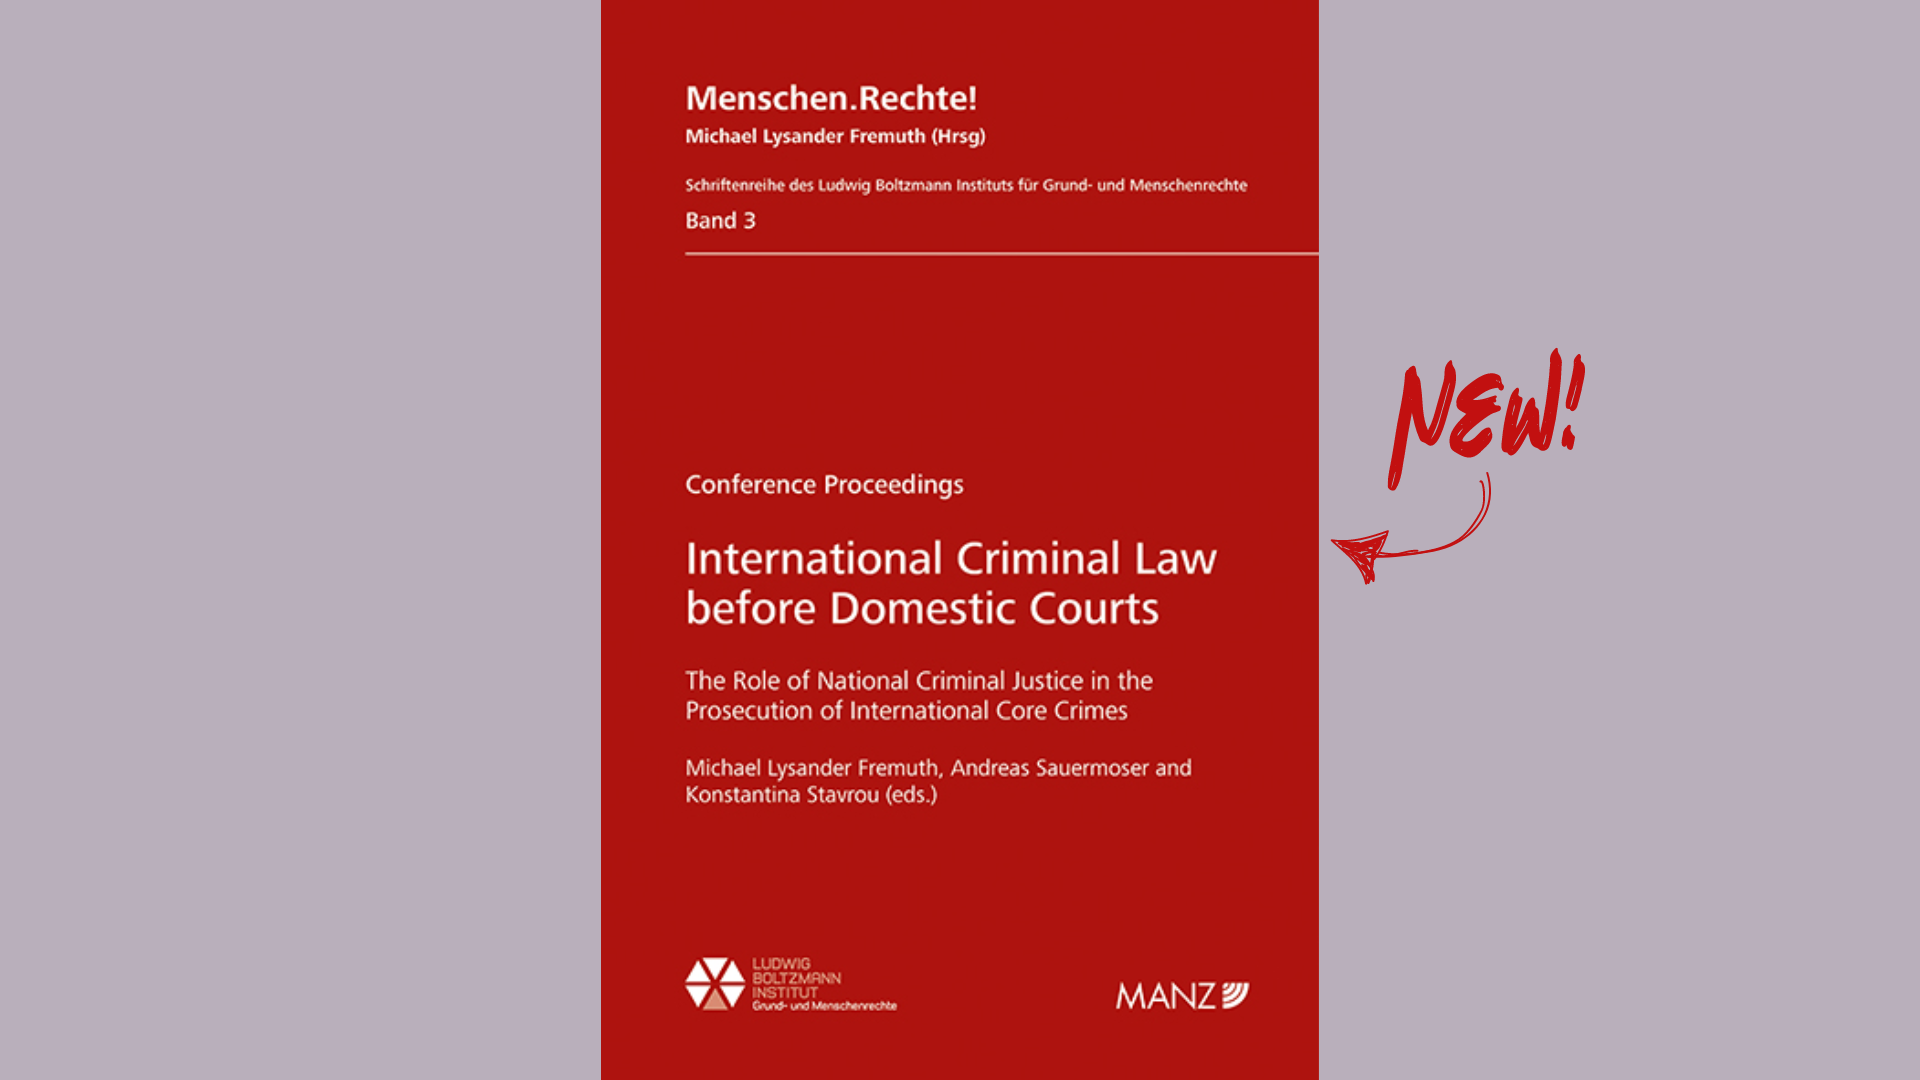 New publication: “International Criminal Law before Domestic Courts”